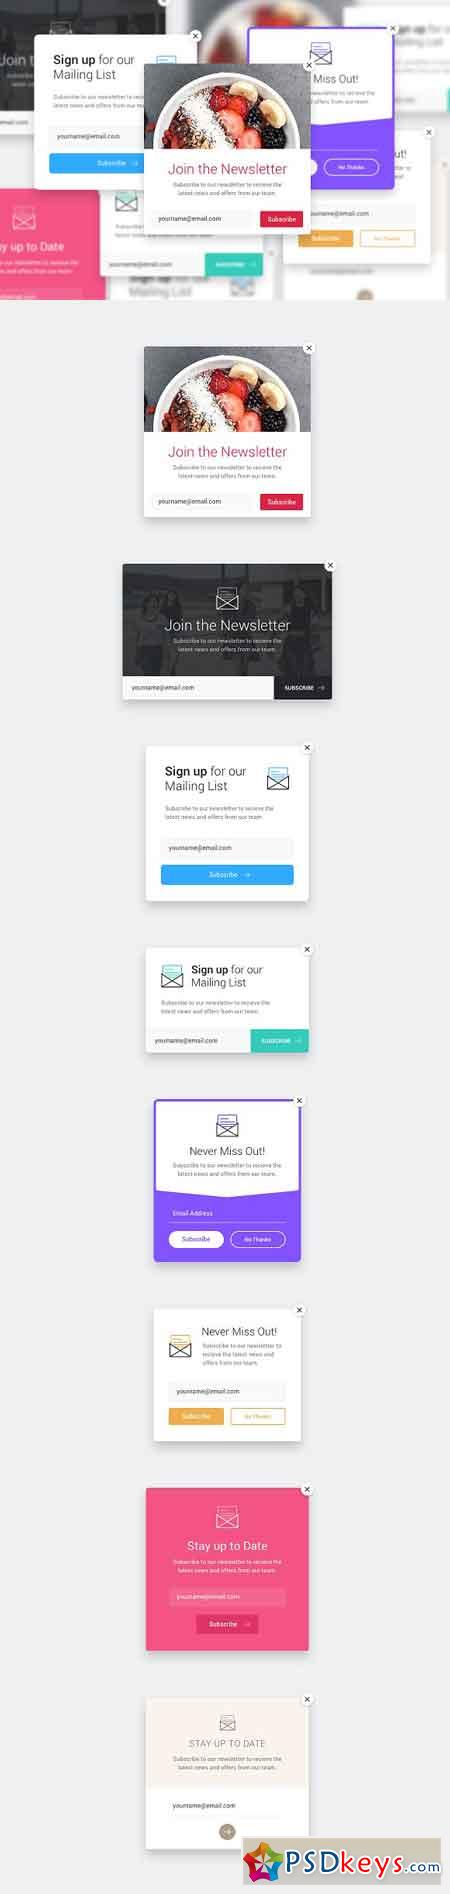 8 Email List Popup Templates 740375